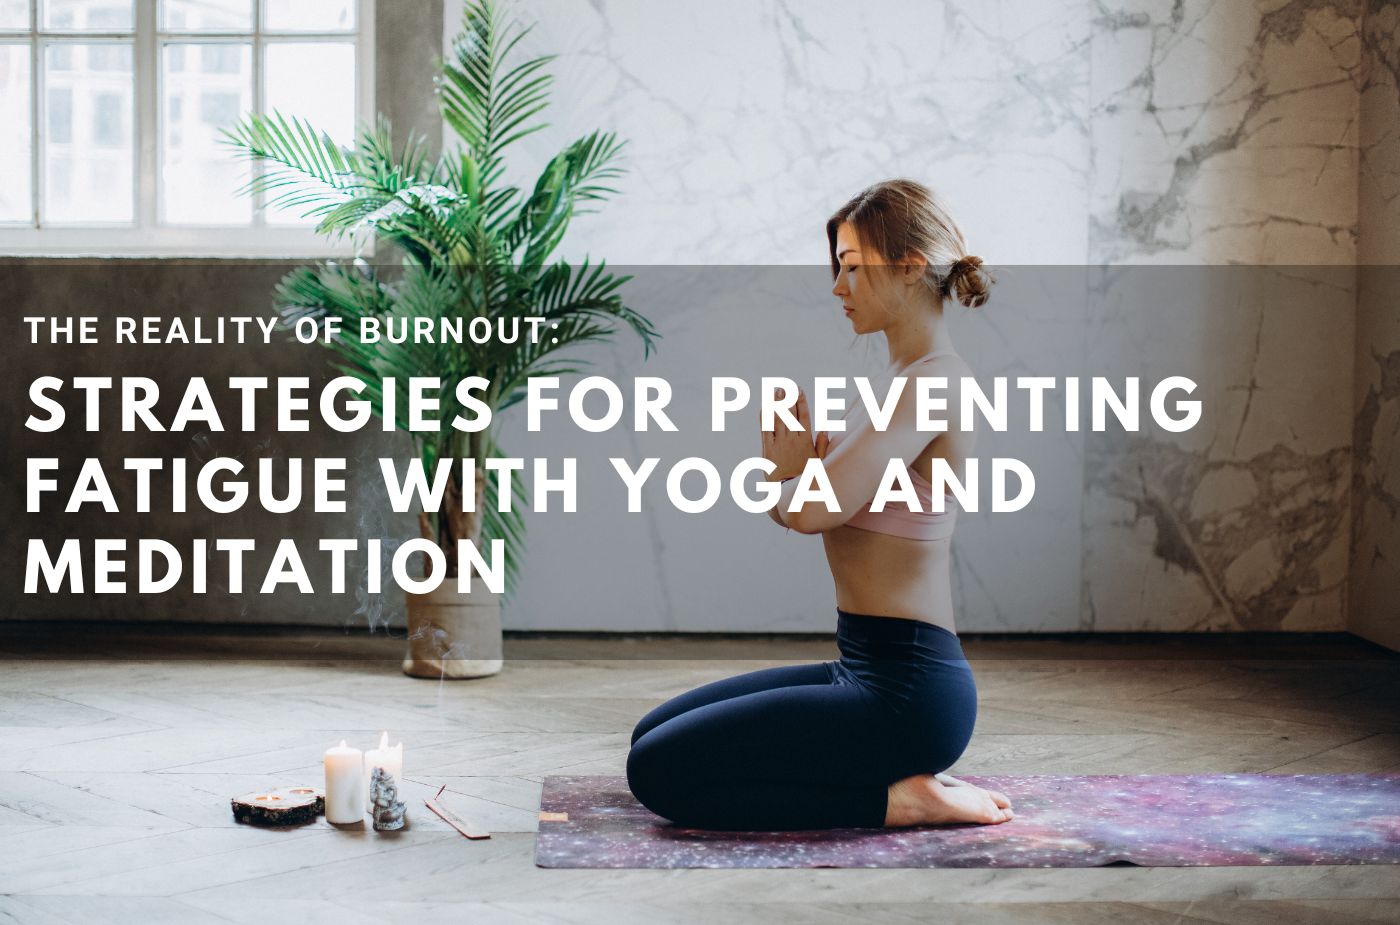 The Reality Of Burnout: Strategies For Preventing Fatigue With Yoga and Meditation